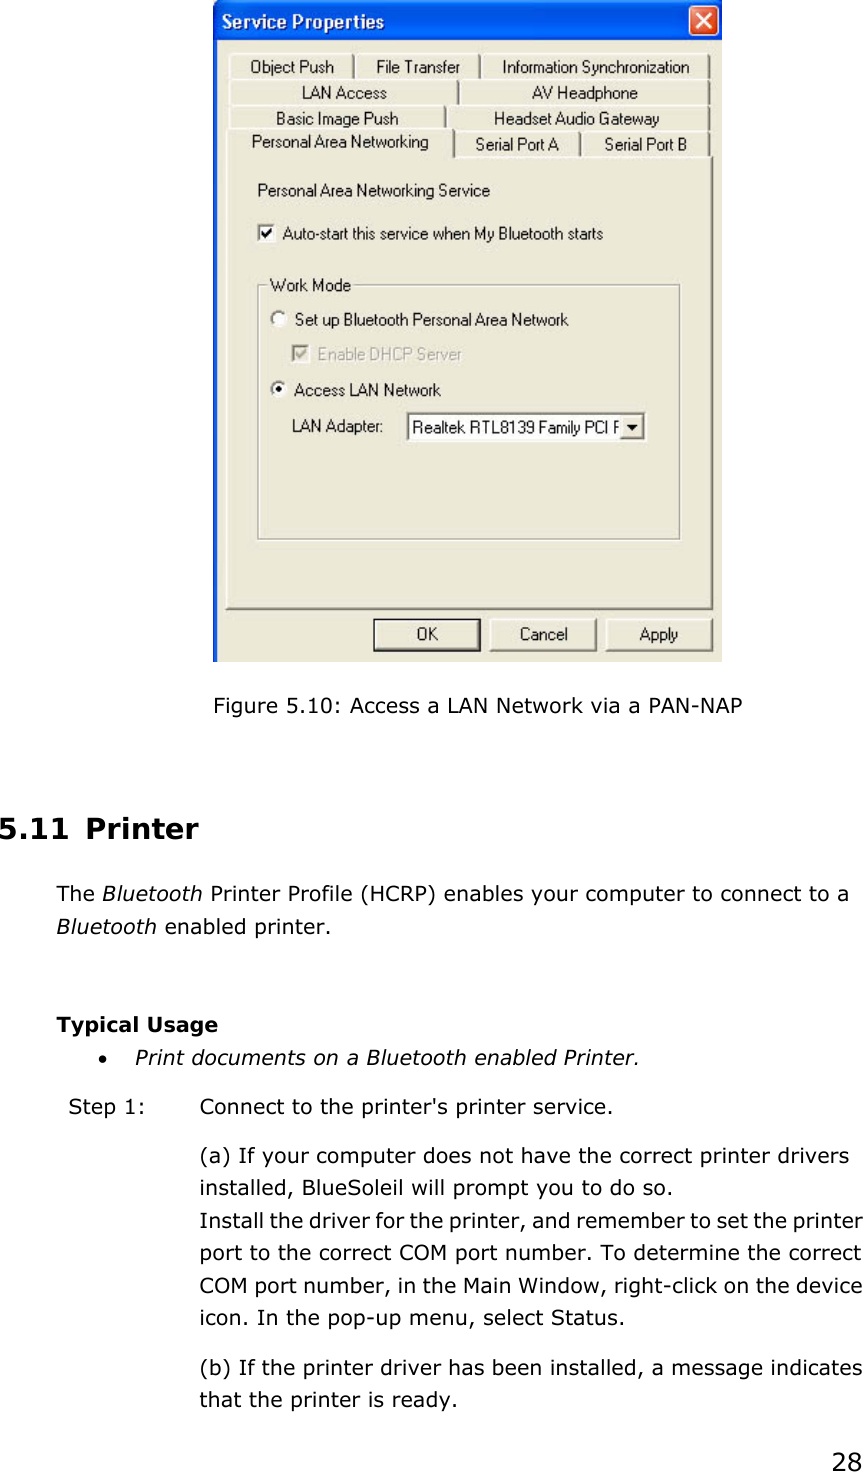 28  Figure 5.10: Access a LAN Network via a PAN-NAP  5.11 Printer The Bluetooth Printer Profile (HCRP) enables your computer to connect to a Bluetooth enabled printer.  Typical Usage • Print documents on a Bluetooth enabled Printer. Step 1:  Connect to the printer&apos;s printer service. (a) If your computer does not have the correct printer drivers installed, BlueSoleil will prompt you to do so. Install the driver for the printer, and remember to set the printer port to the correct COM port number. To determine the correct COM port number, in the Main Window, right-click on the device icon. In the pop-up menu, select Status. (b) If the printer driver has been installed, a message indicates that the printer is ready.   